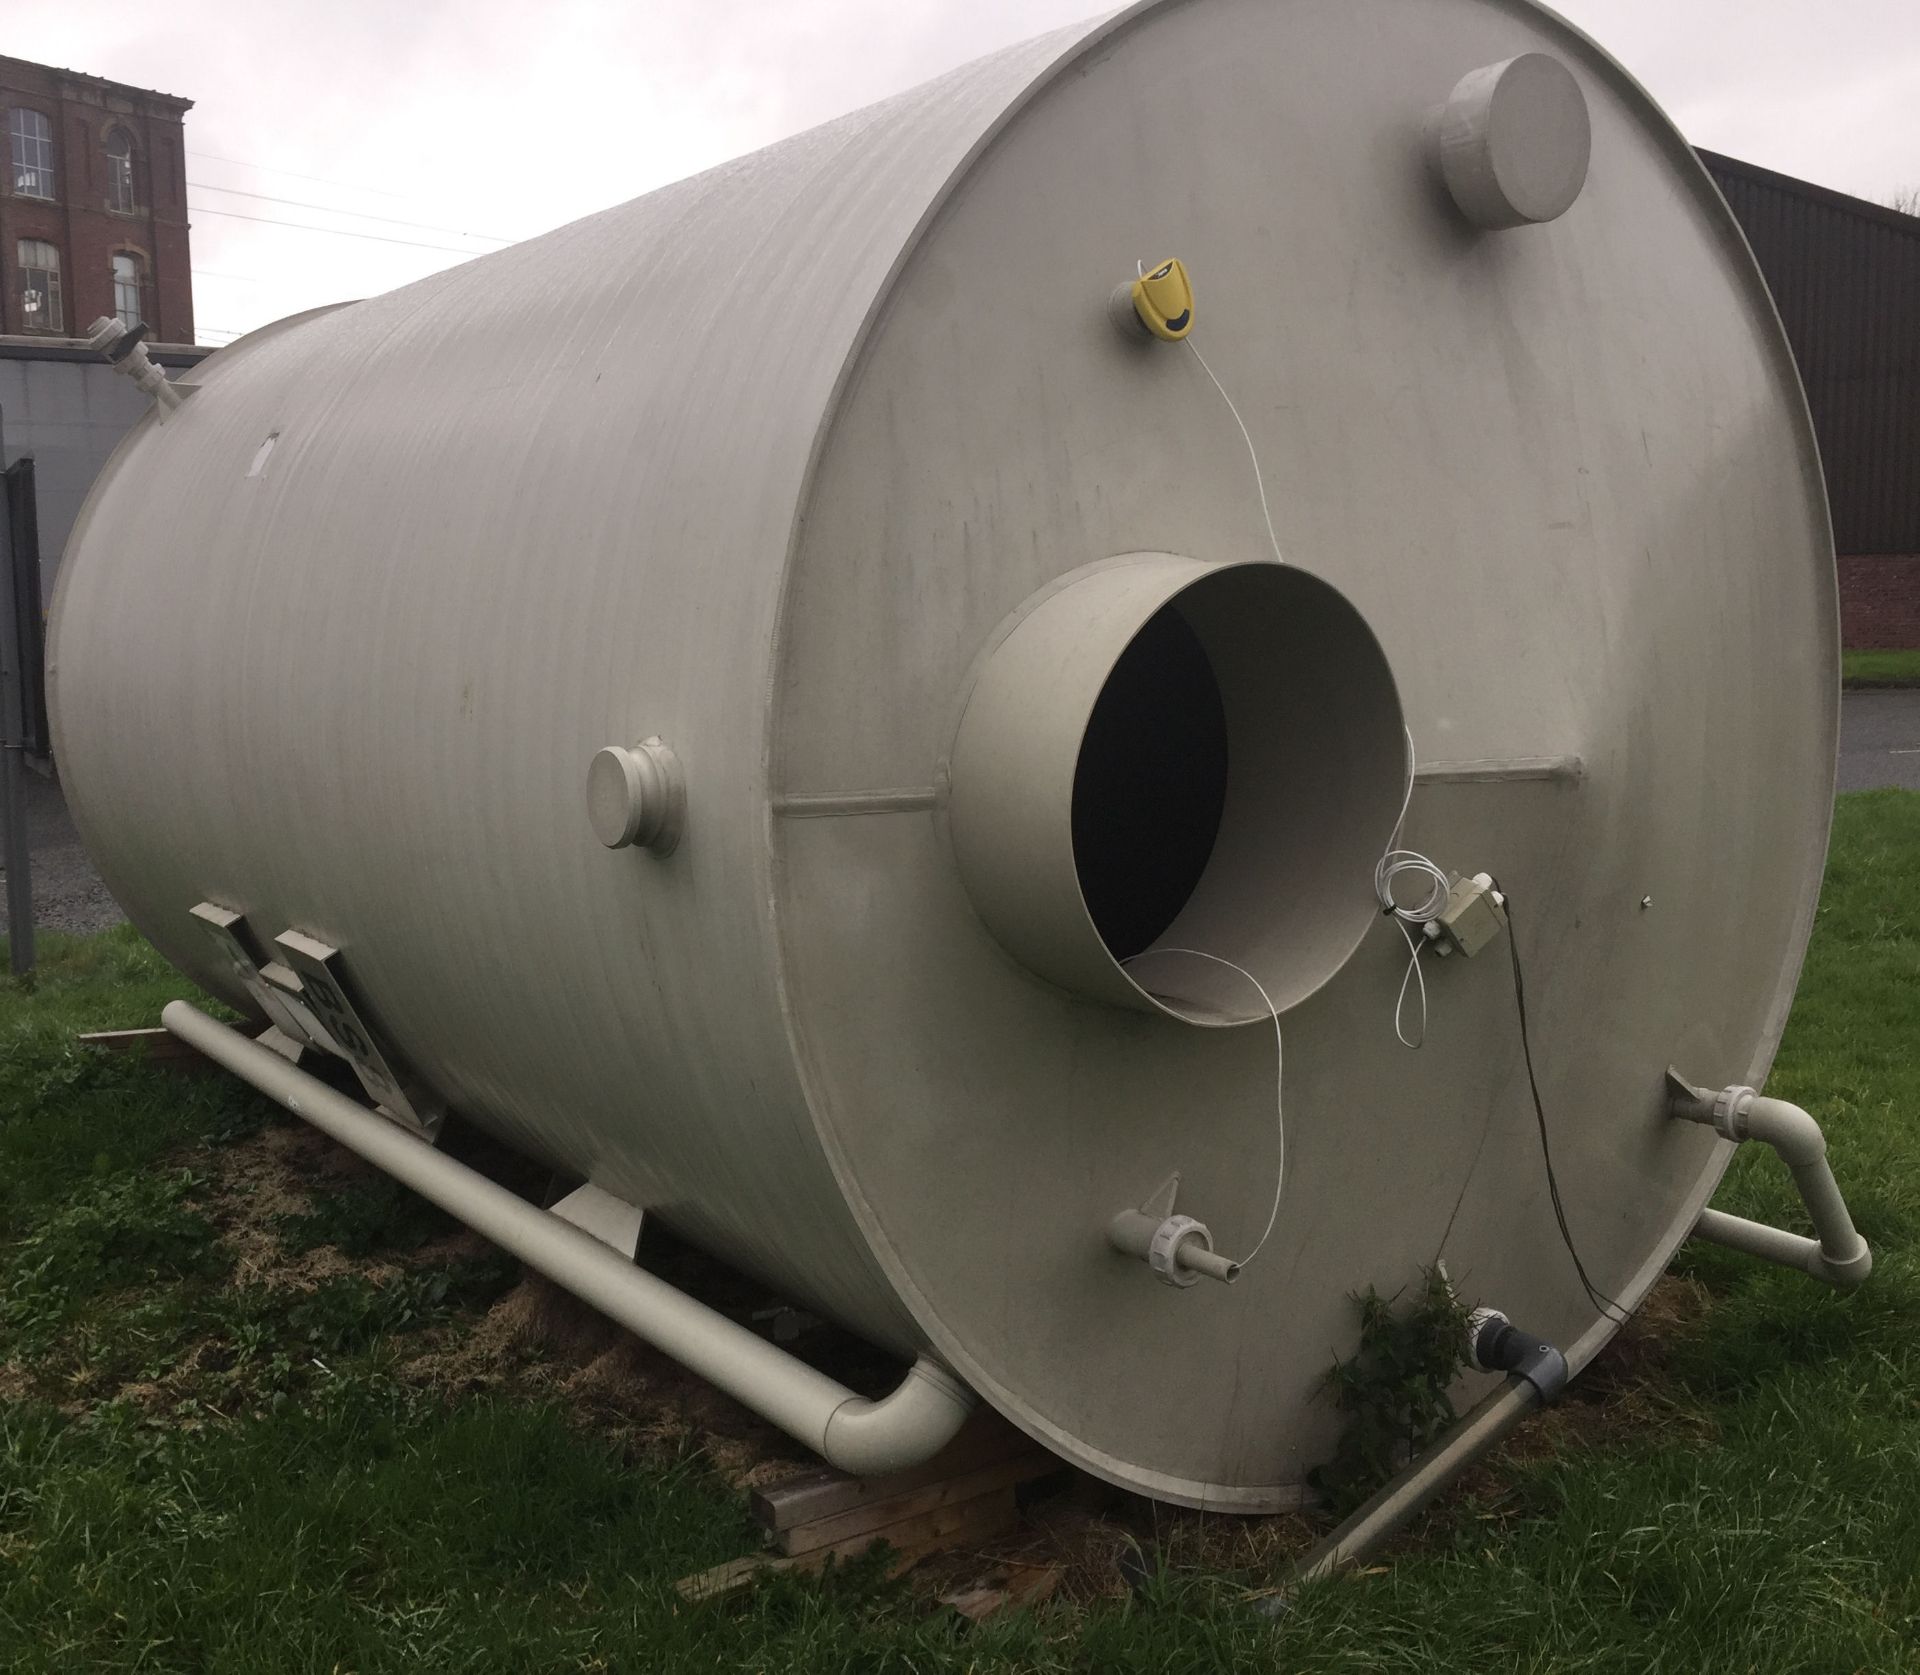 1 x BHD1 25,000 Litre Polypropylene Chem Resist Tank - Location: Oldham Has been used for detergent - Image 2 of 8